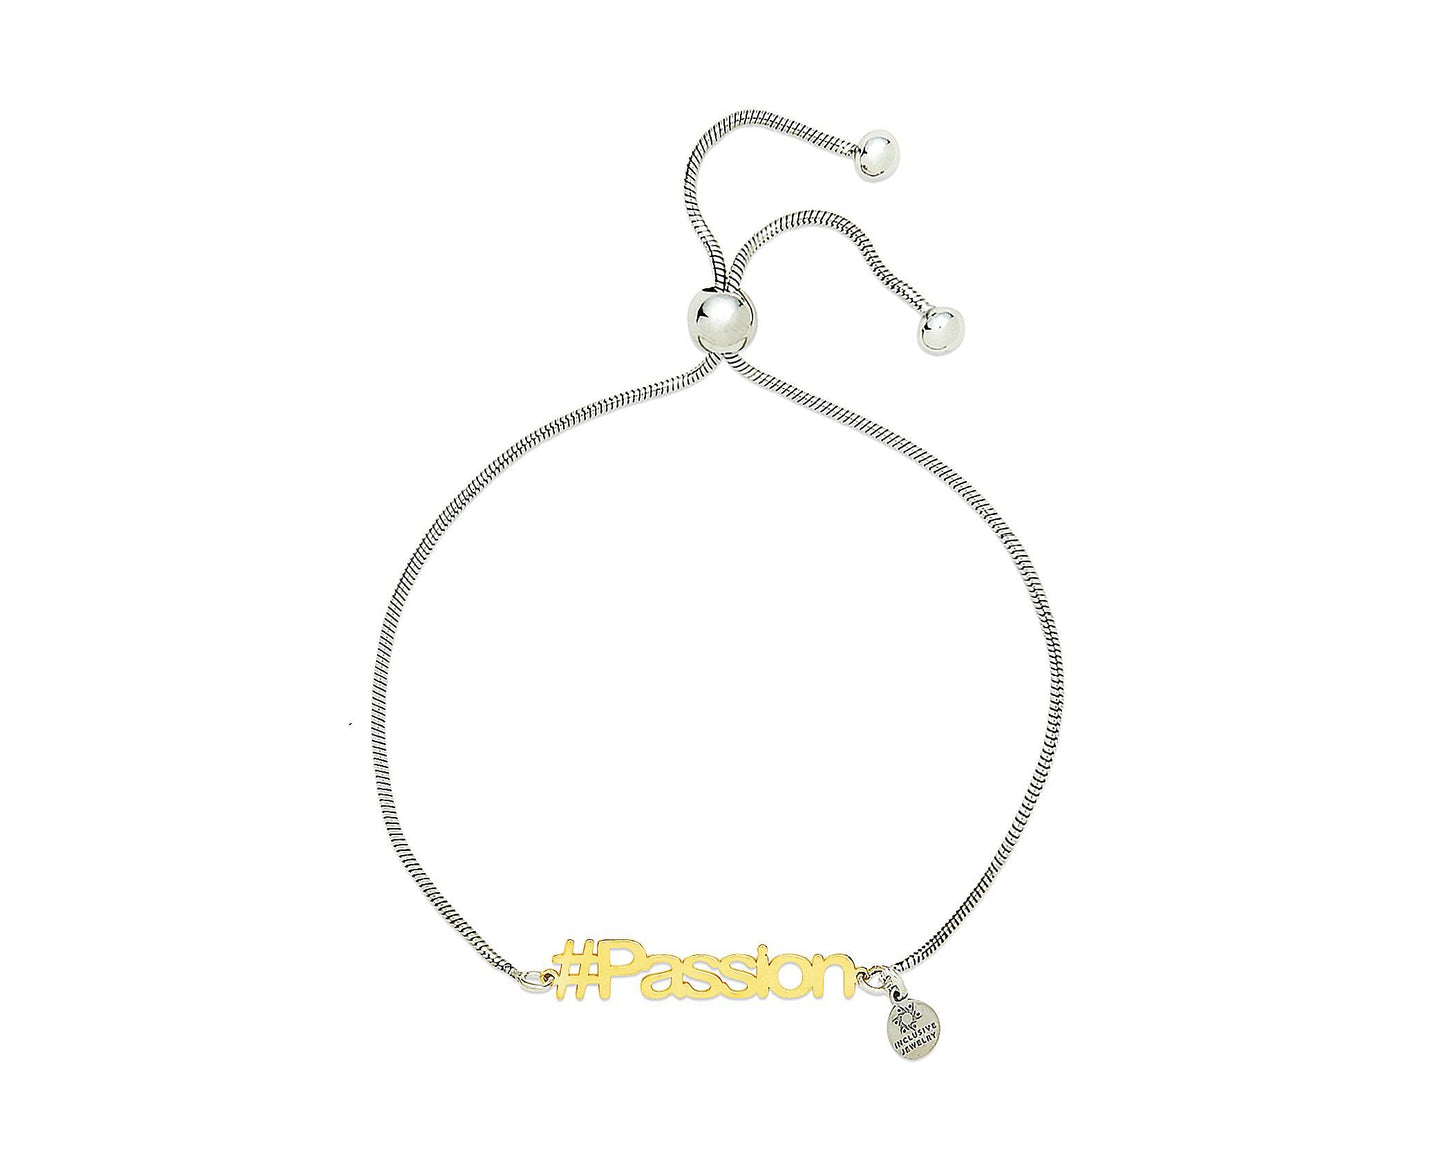 Passion Hashtag Bracelet - InclusiveJewelry